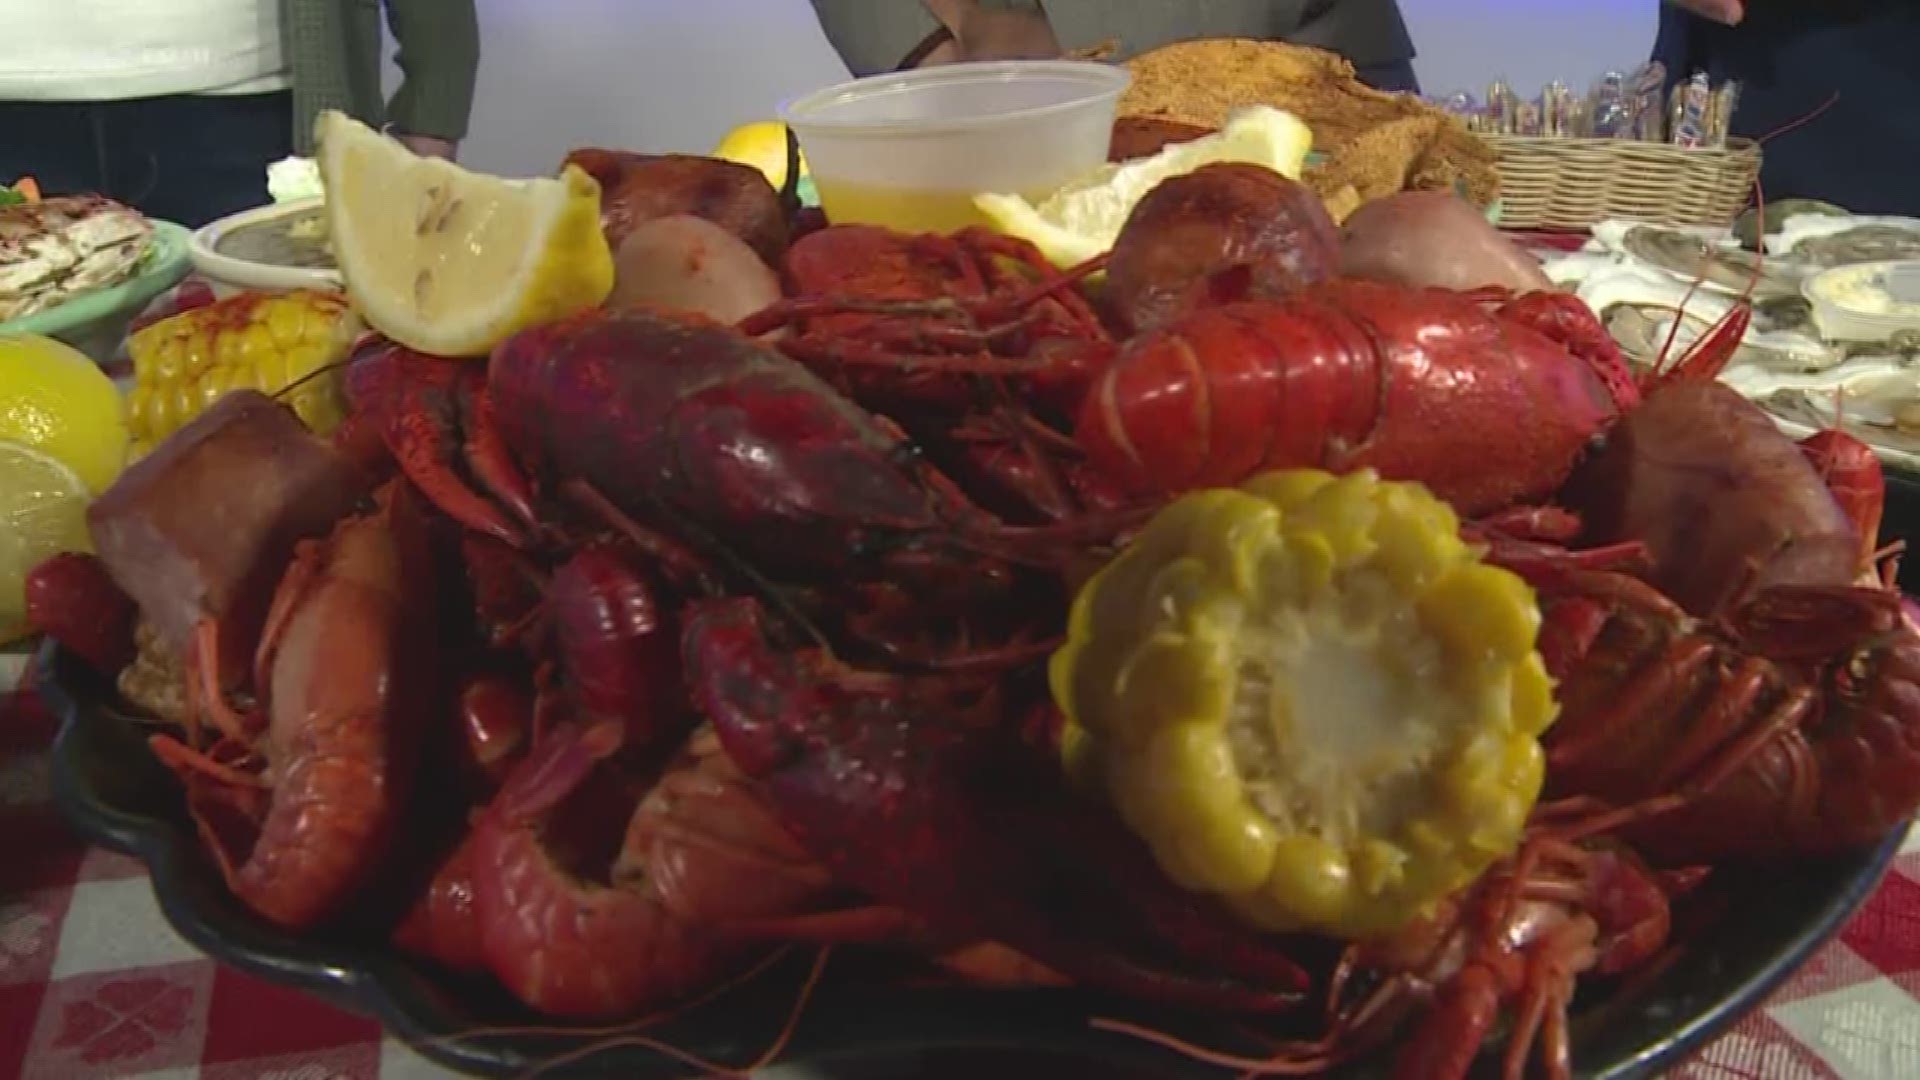 It's crawfish season, y'all! If you're looking to get your fix-- Dry Dock Oyster Bar is the place to be!